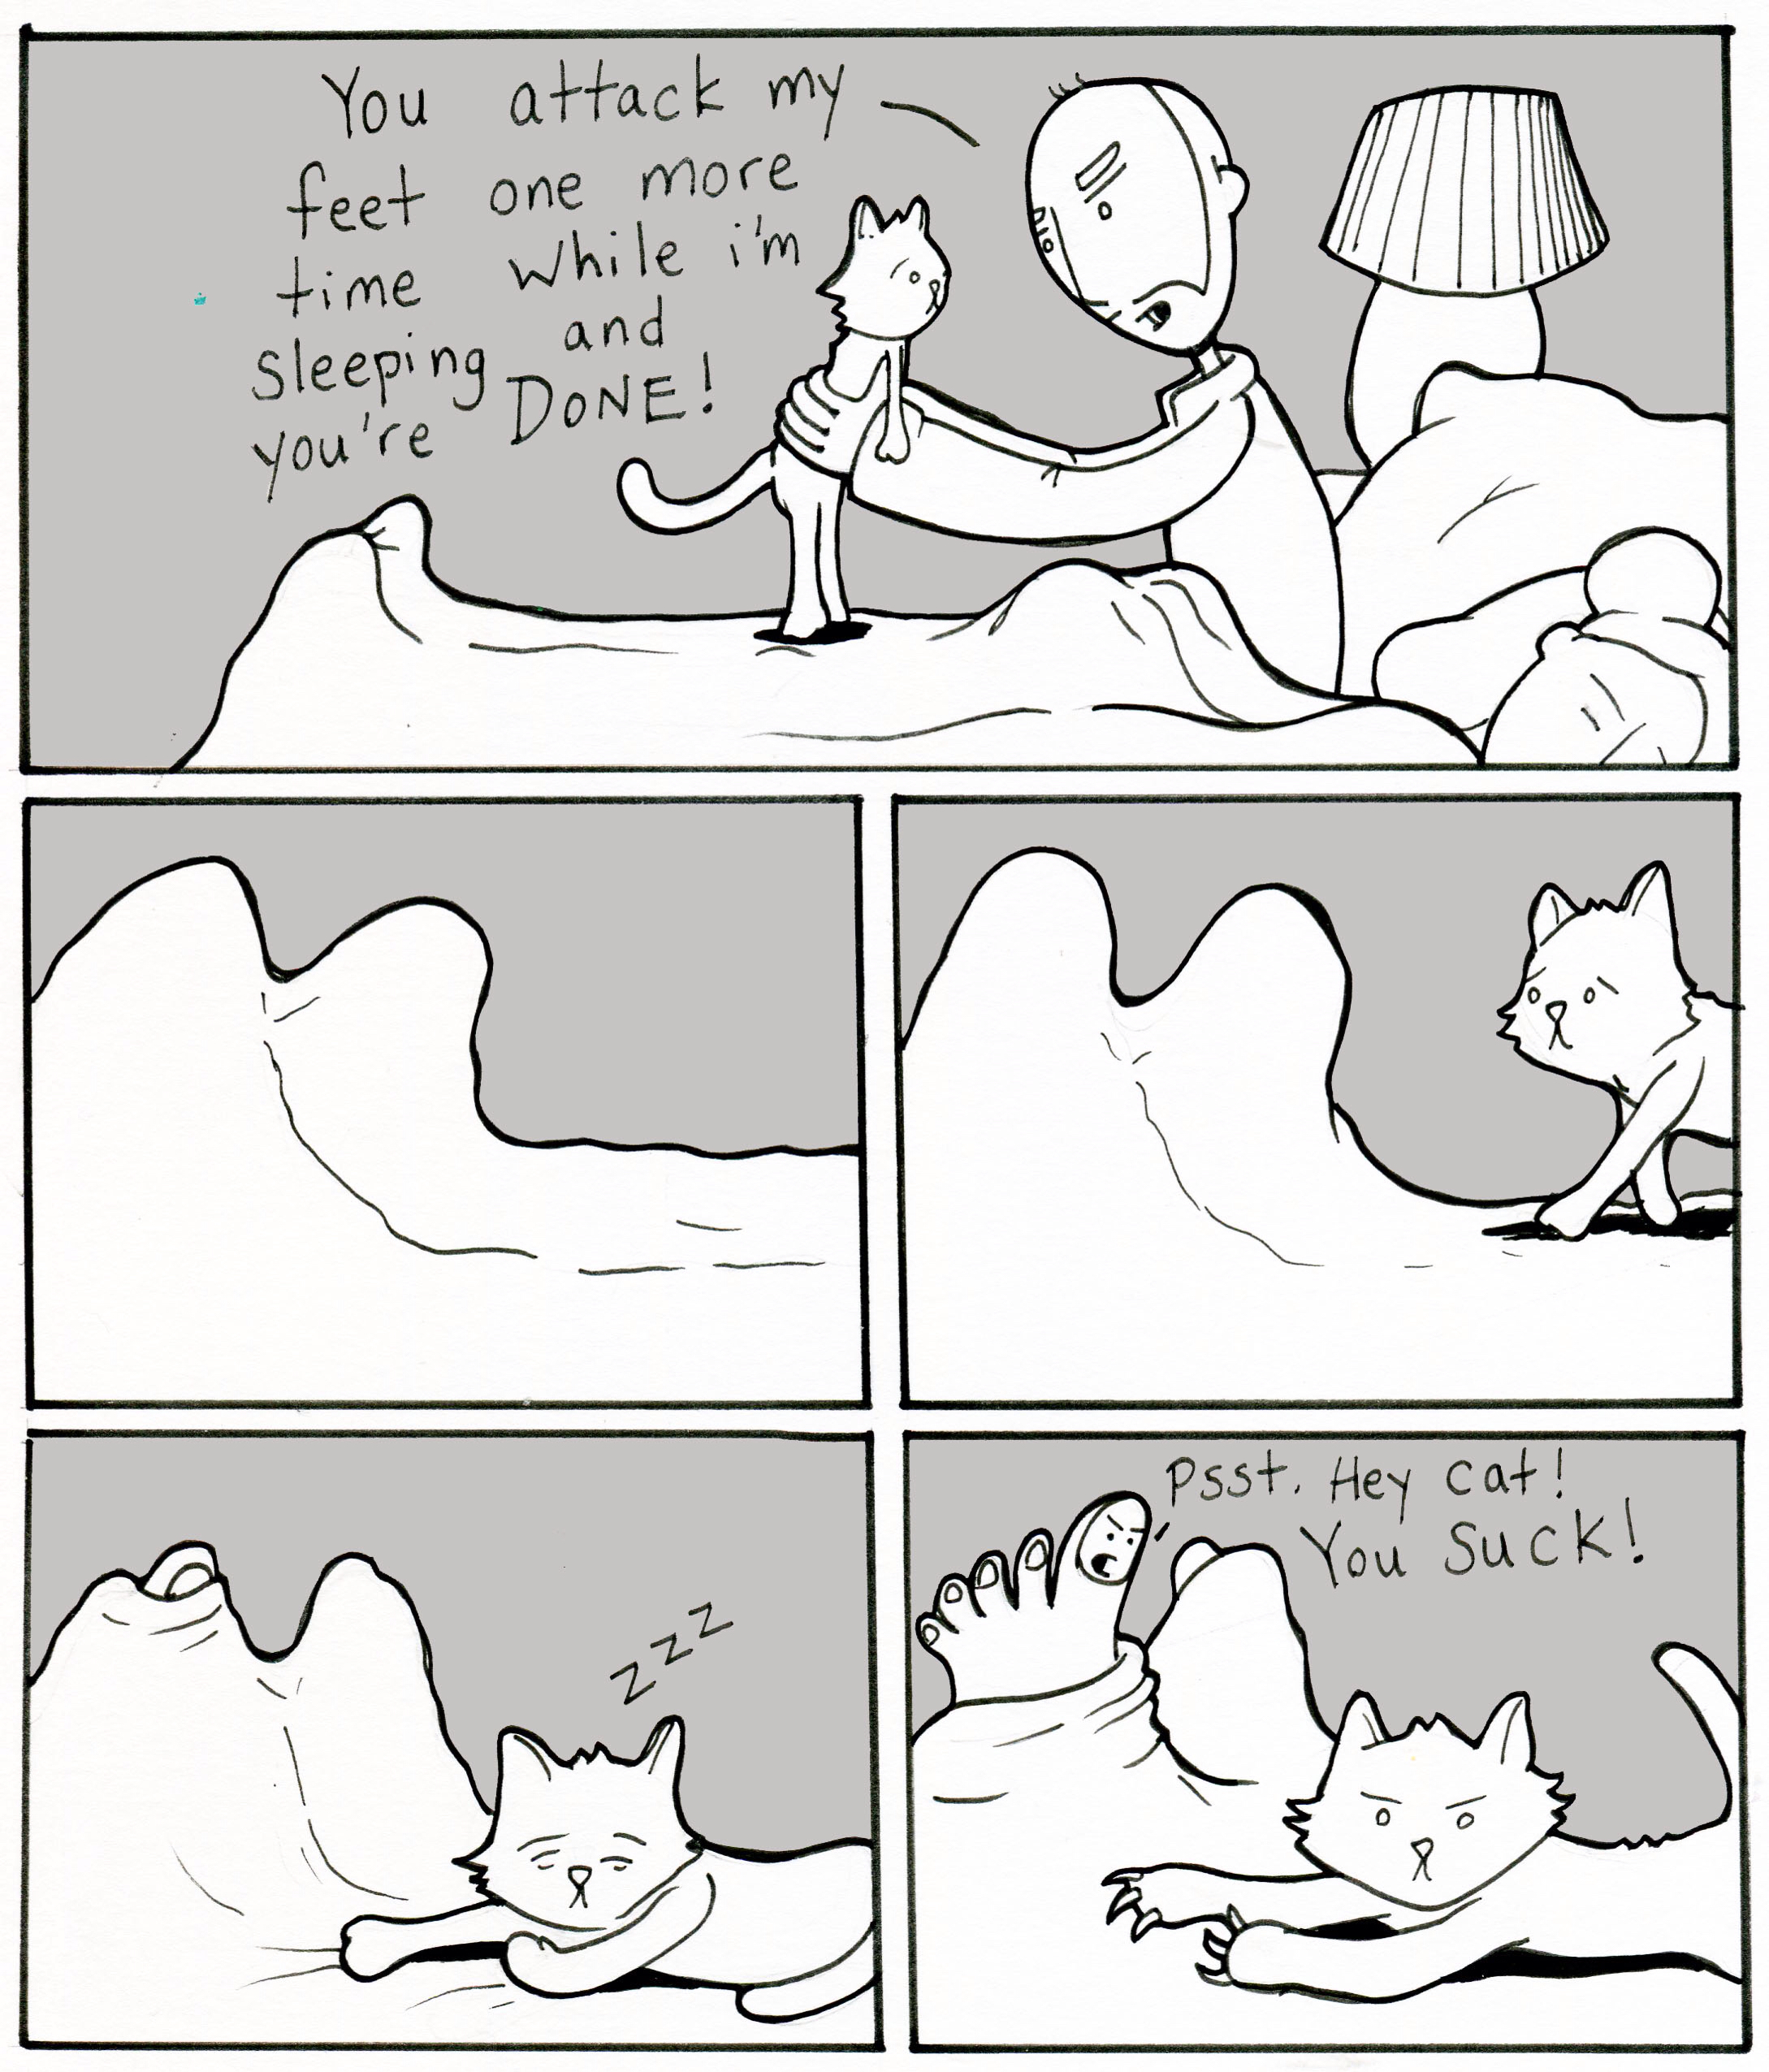 lunarbaboon cat - You attack my feet one more time while im s Sleeping and You're Done! Psst. Hey cat! care You Suck! 222